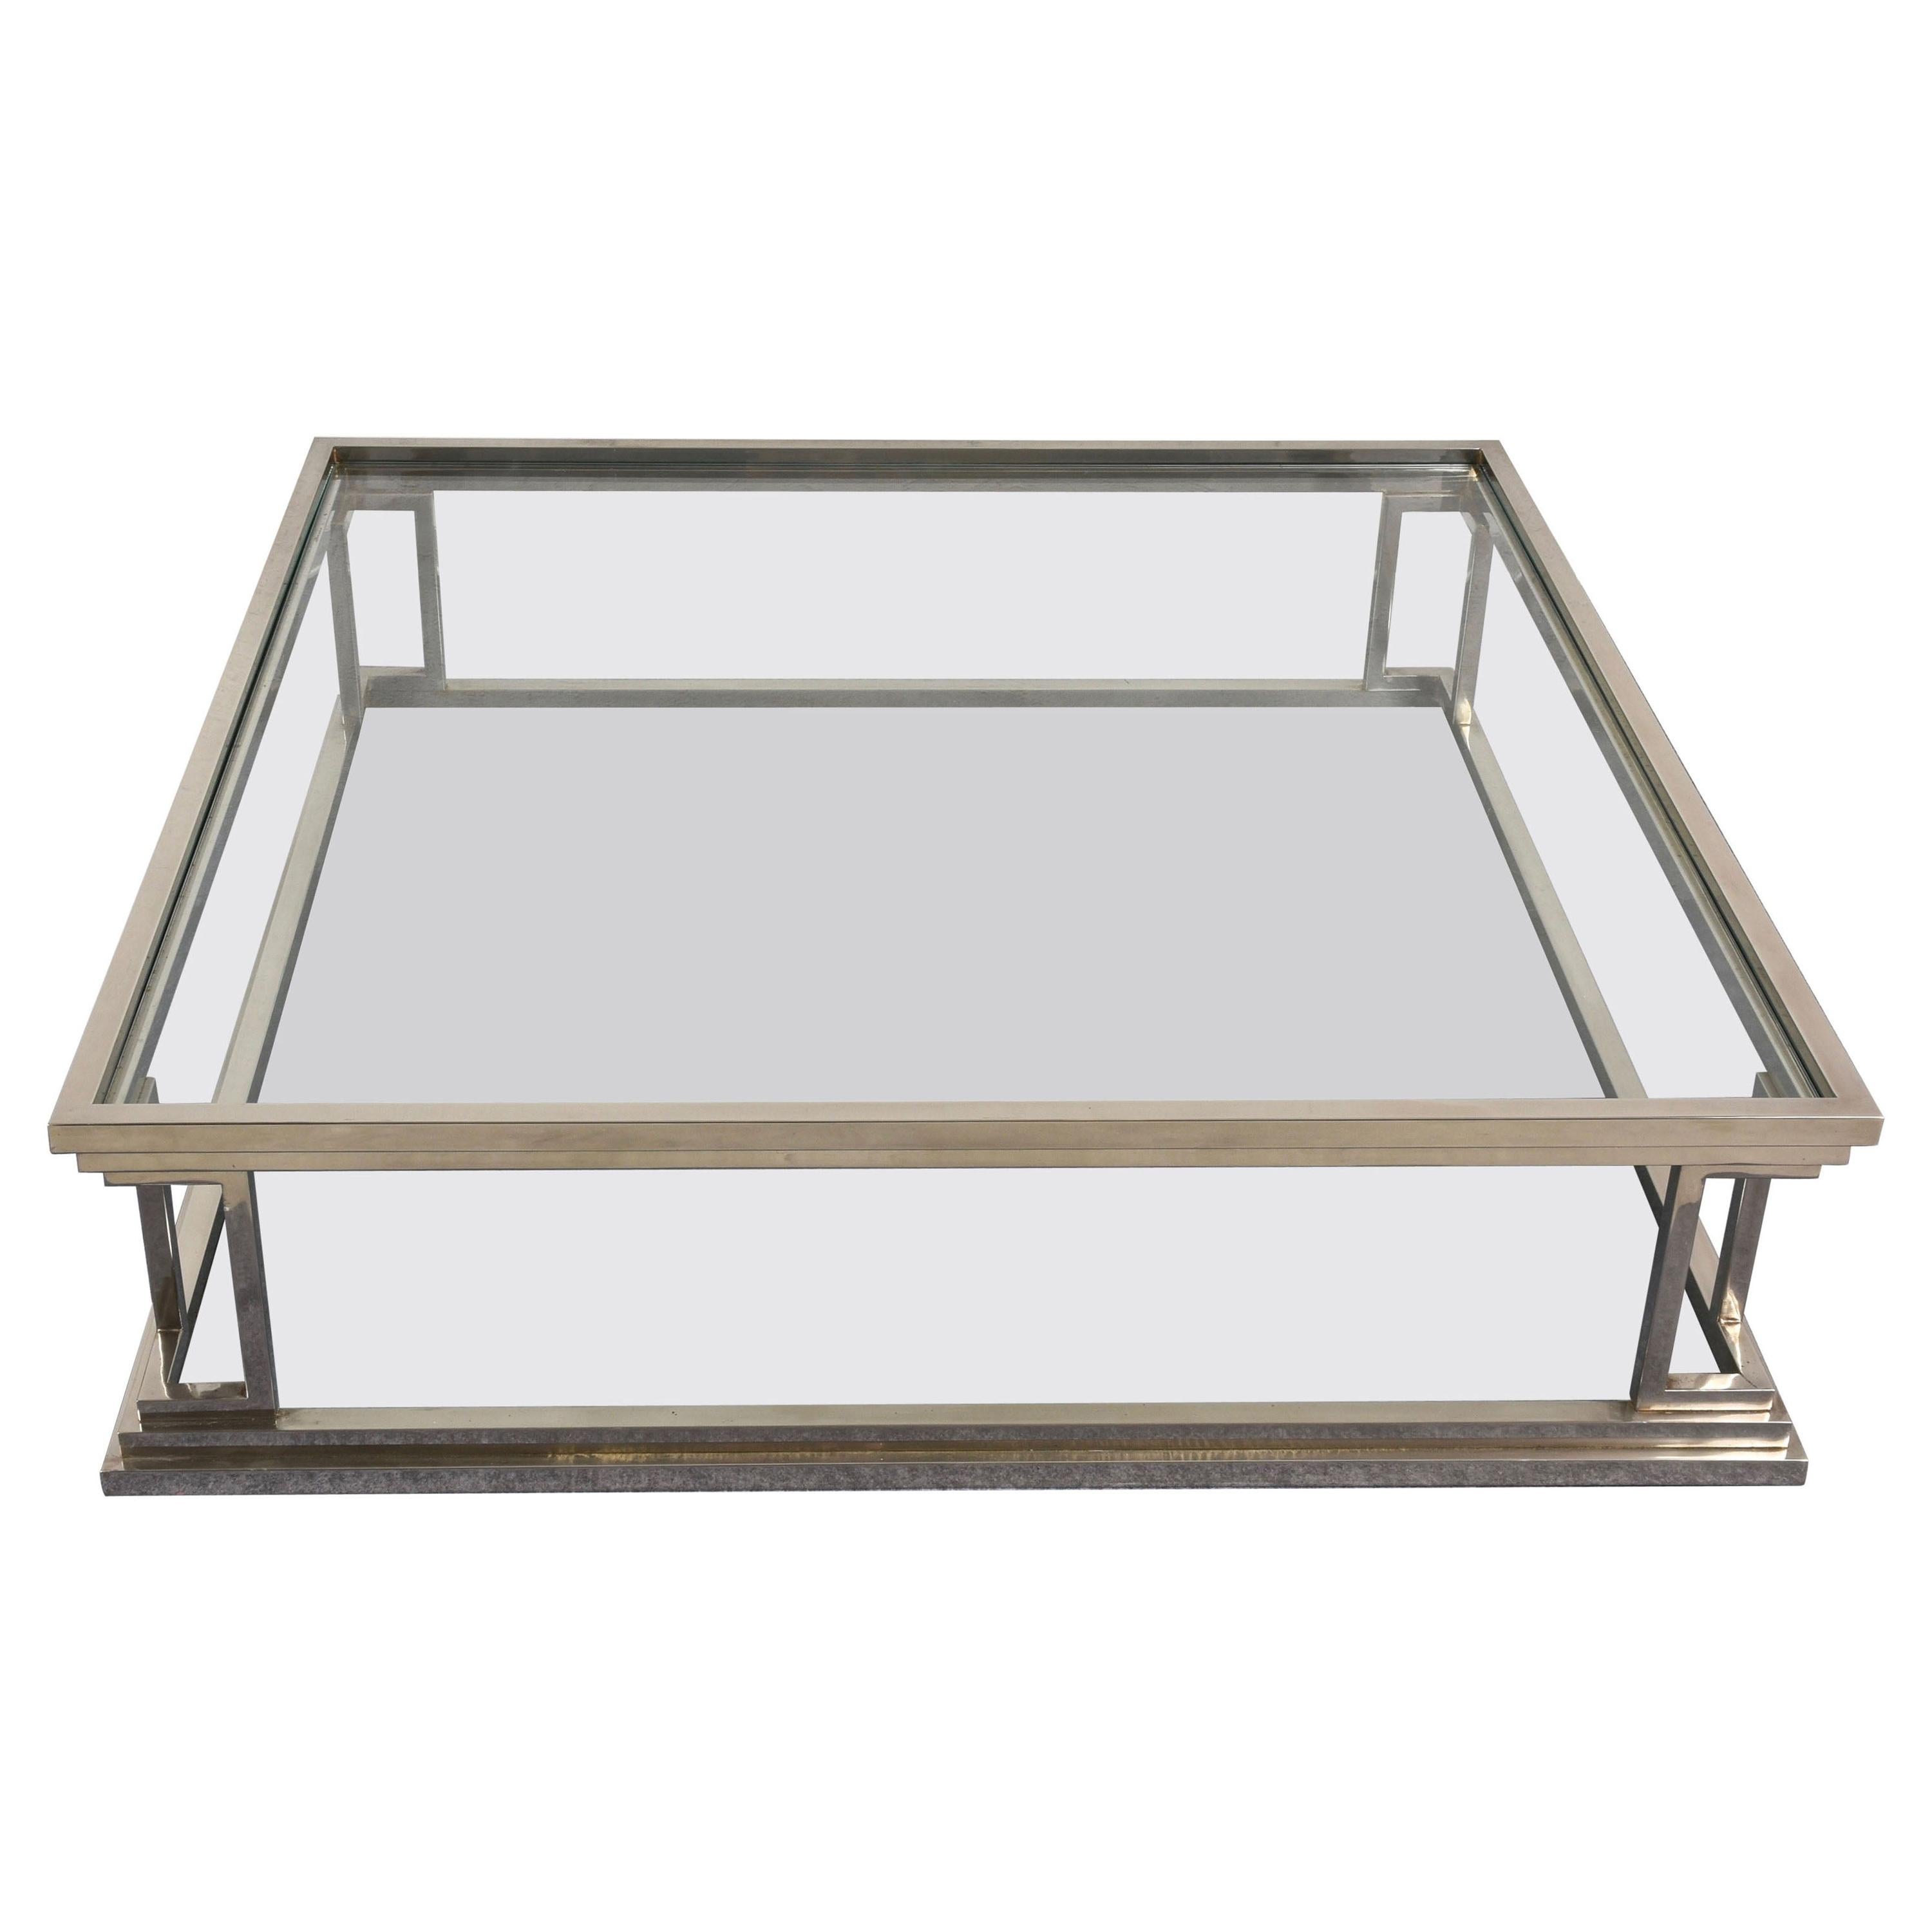 Chromed Brass Square Two Levels Italian Coffee Table with Glass Tops, 1970s